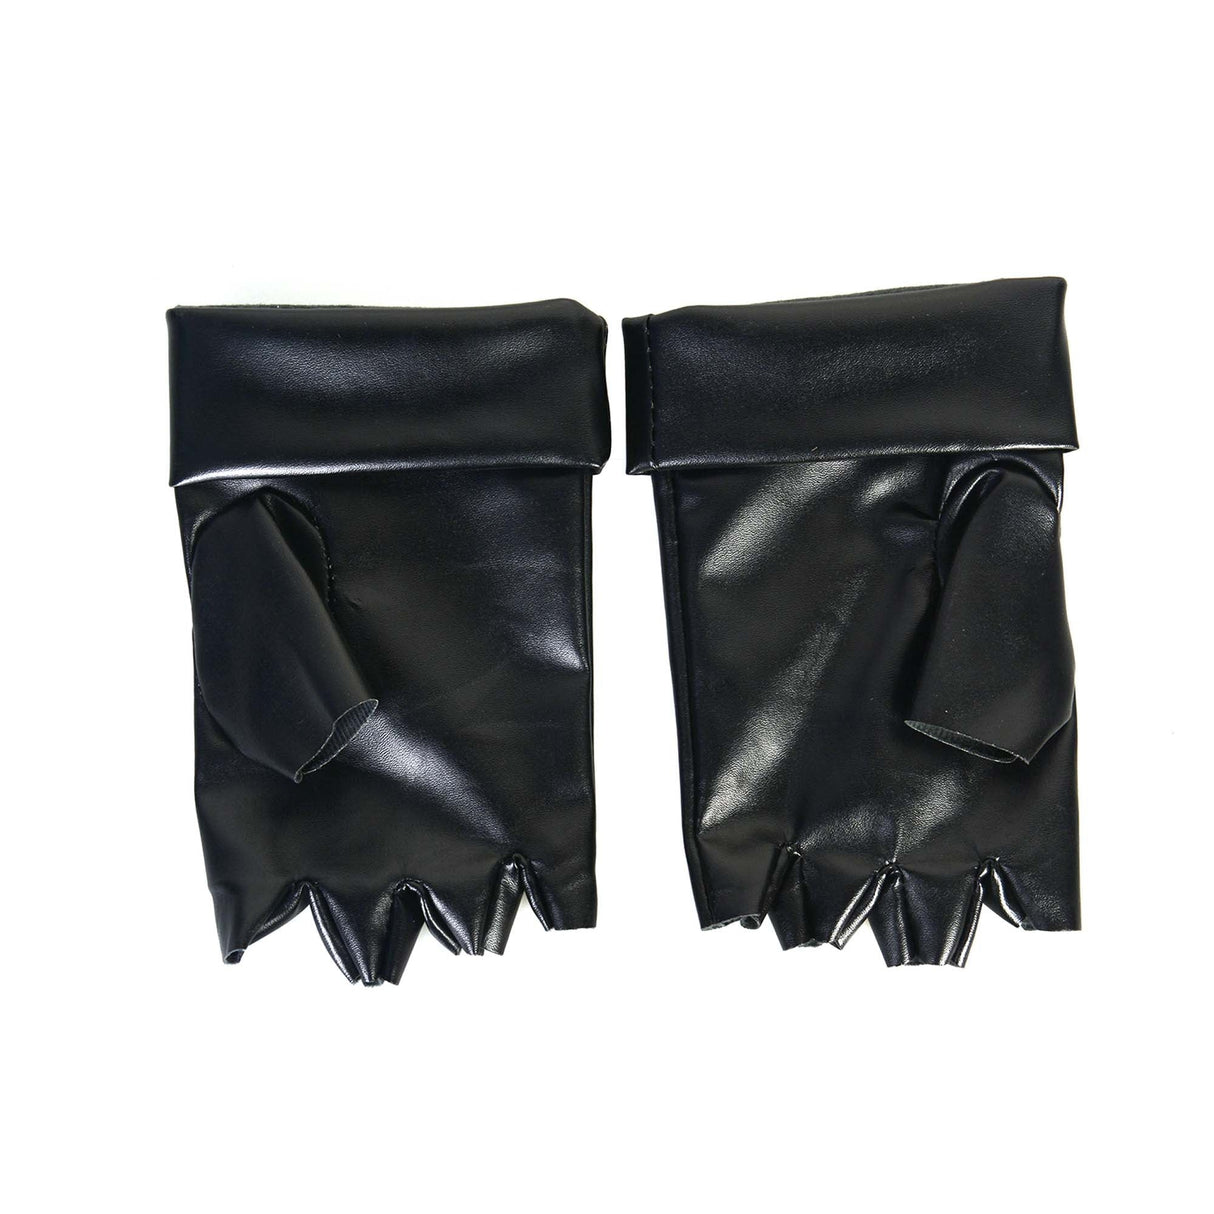 SHENZHEN PARTYGEARS DEVELOPMENT CO. LTD Costumes Accessories The Copy Ninja Anime Gloves for Adults, 2 Count 810077658994